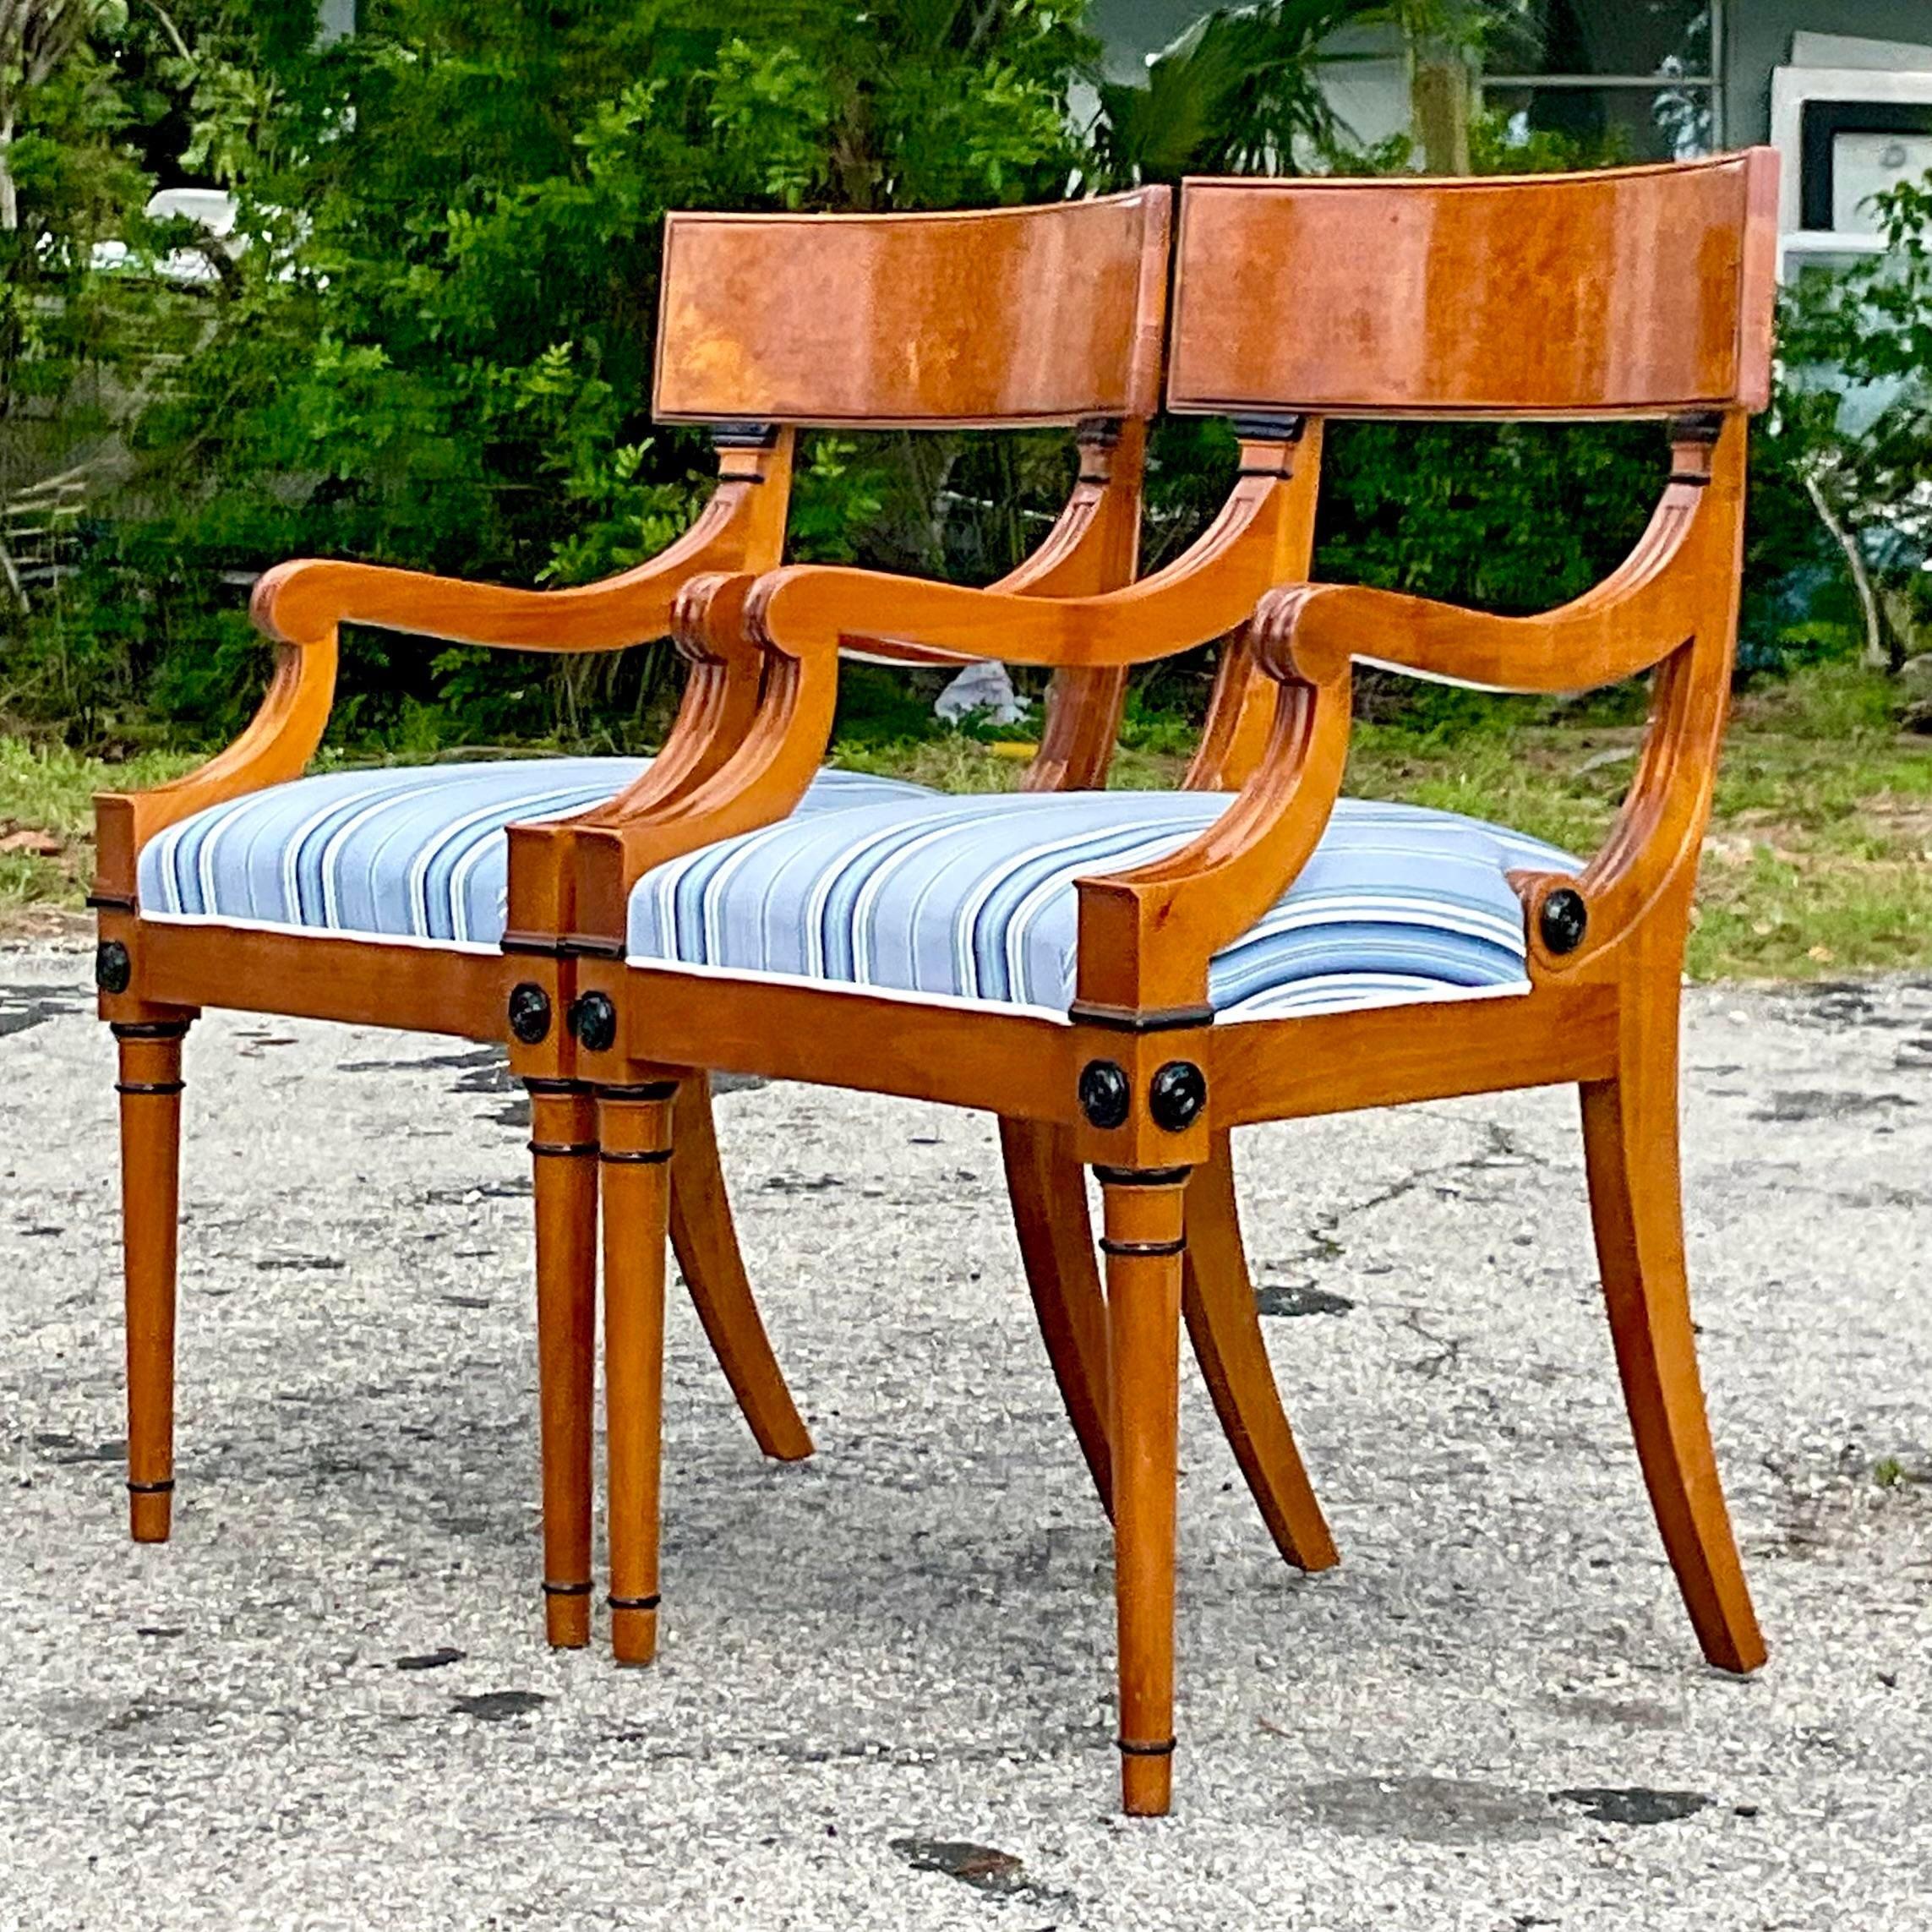 A fabulous pair of vintage Burl wood Klismos arm chairs. Done in the fabulous Biedermeier style. Gorgeous wood grain detail and Ralph Lauren striped upholstery. Acquired from a Palm Beach estate.